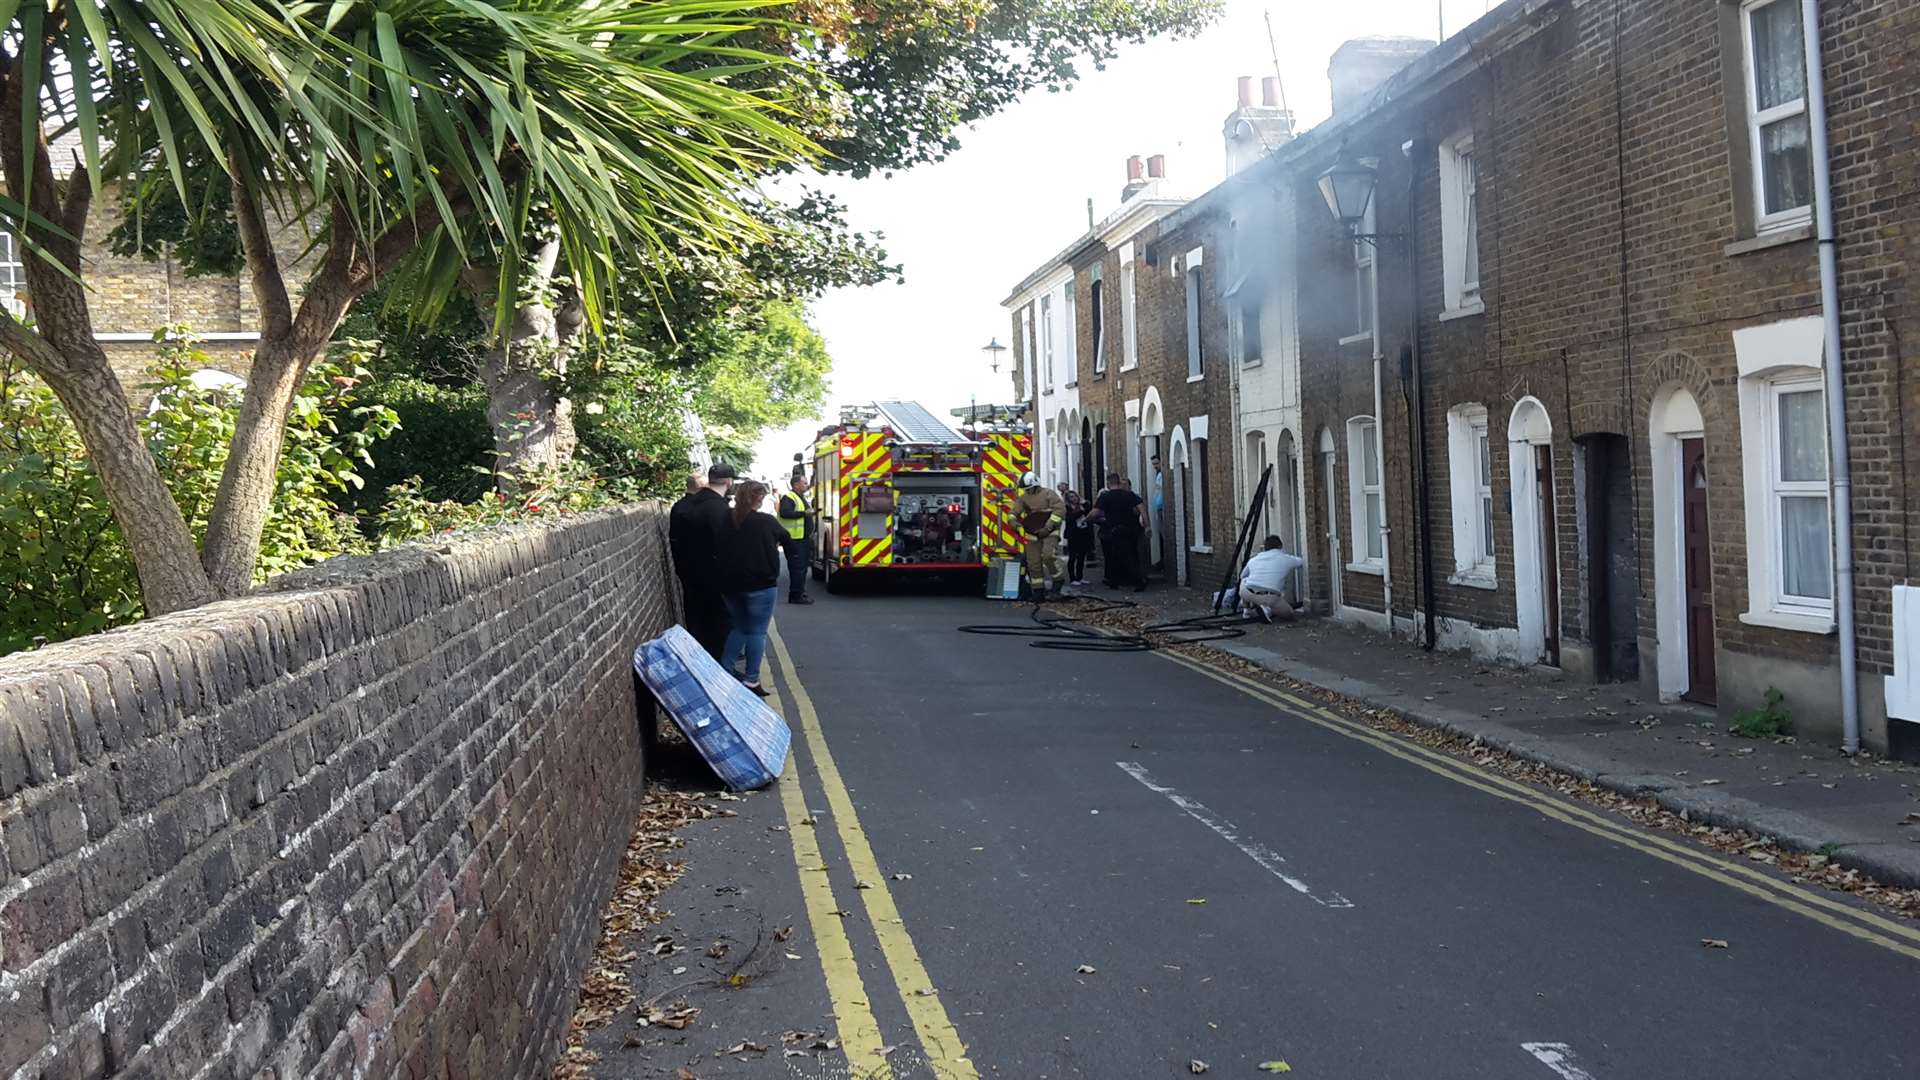 Firefighters at the scene of the blaze in Beach Street, Sheerness